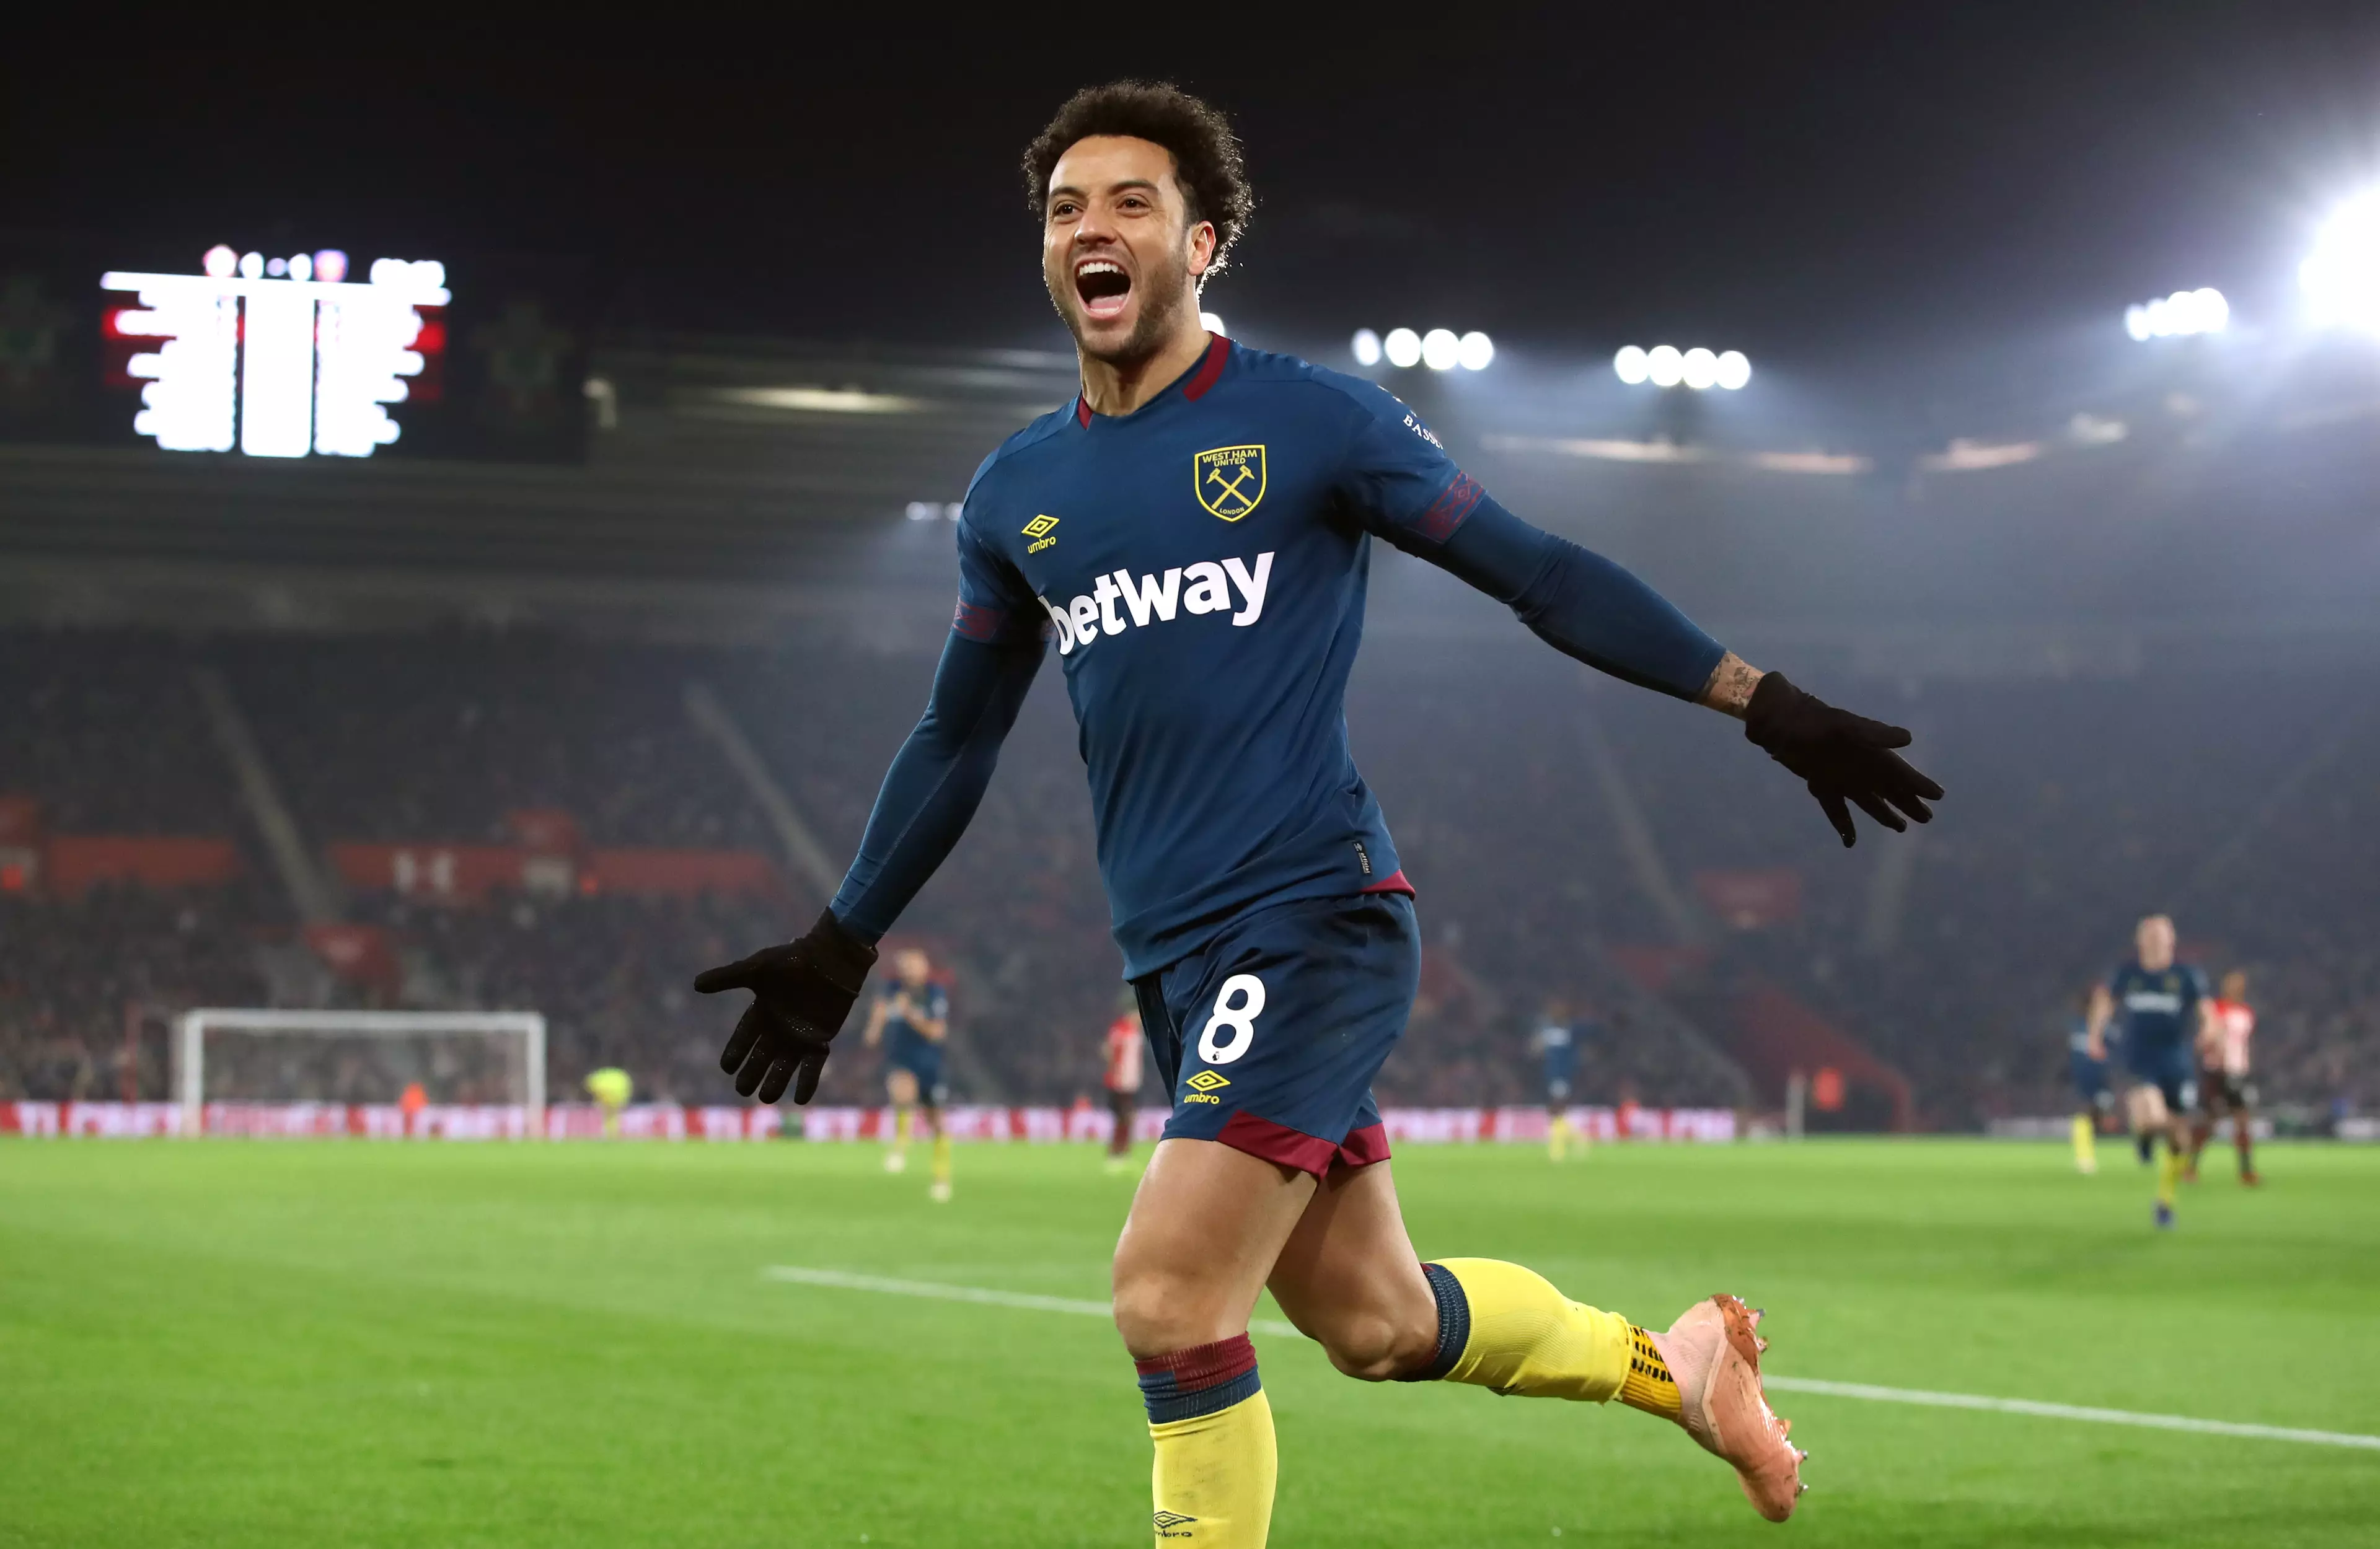 Felipe Anderson has had a good start to life in England. Image: PA Images